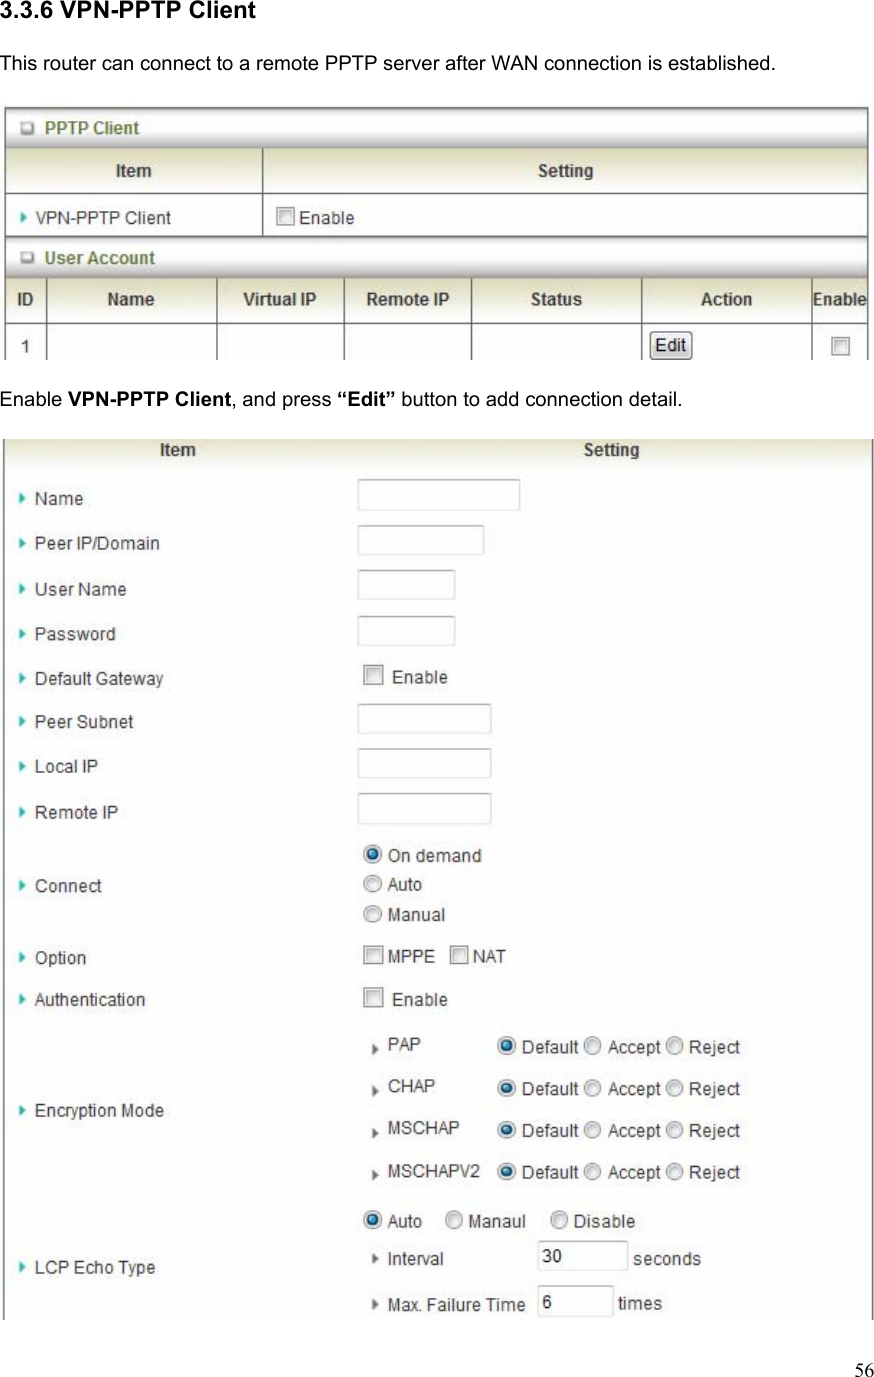  563.3.6 VPN-PPTP Client  This router can connect to a remote PPTP server after WAN connection is established.    Enable VPN-PPTP Client, and press “Edit” button to add connection detail.   